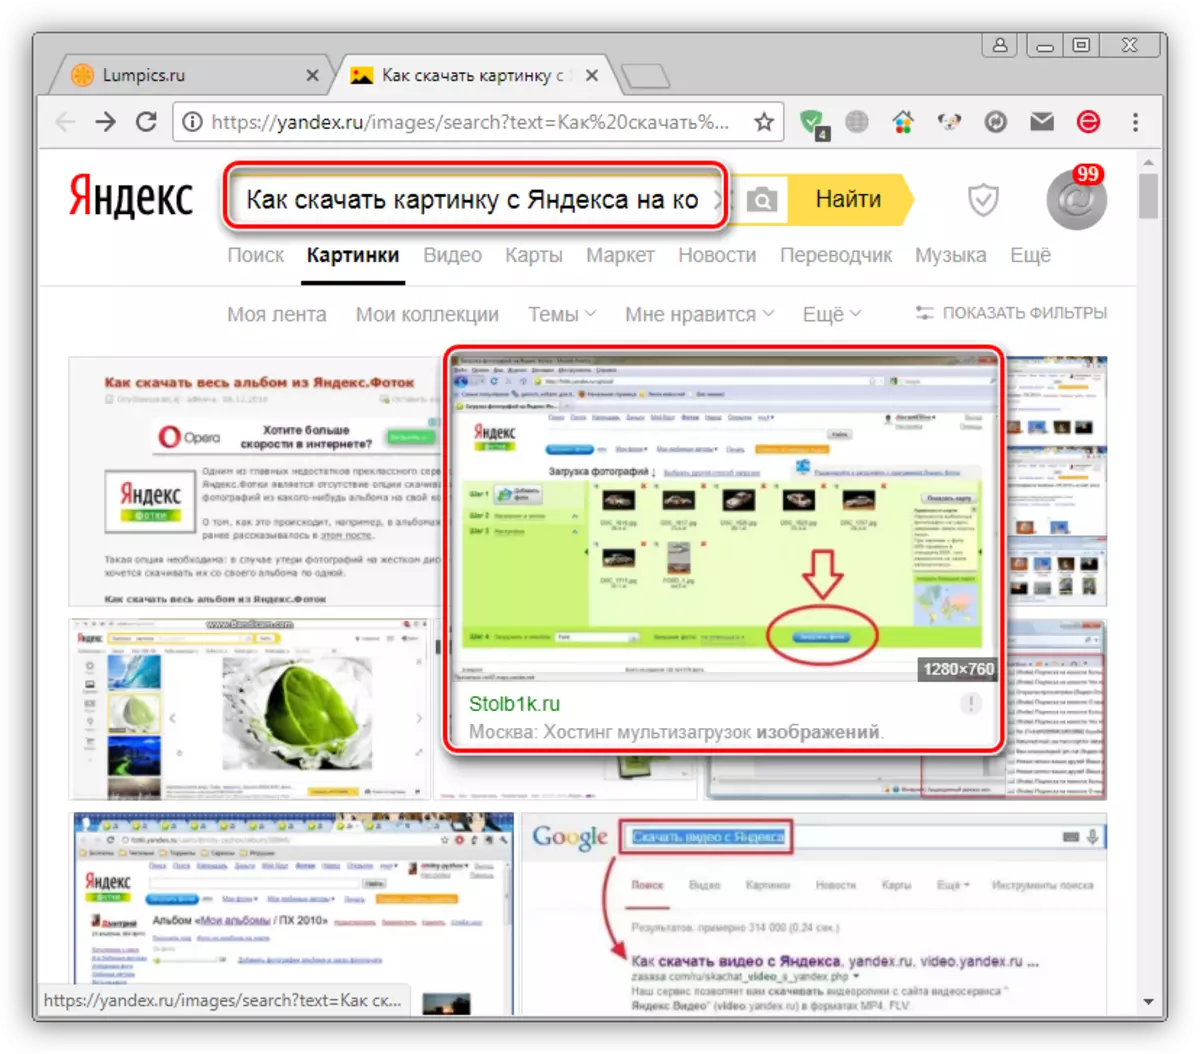 Image selection for downloading Yandex search results in Google Chrome